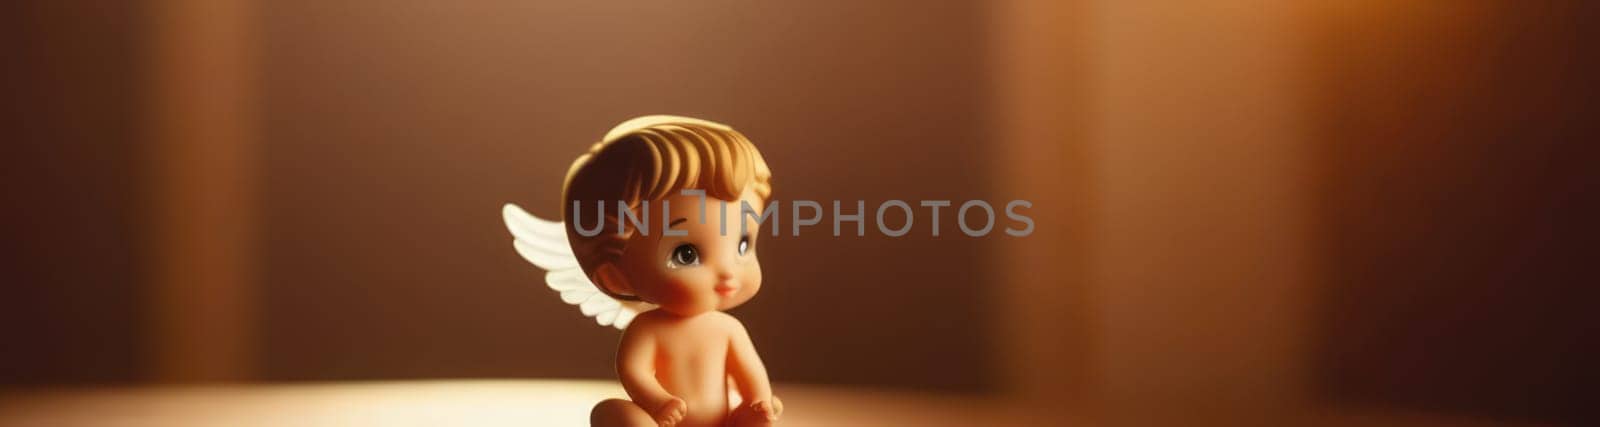 Illustration of greeting card of figurine of cute, funny baby cupid angel with gold curly hair on pastel colors background. Promotion, shopping template for love and valentines, mothers day concept